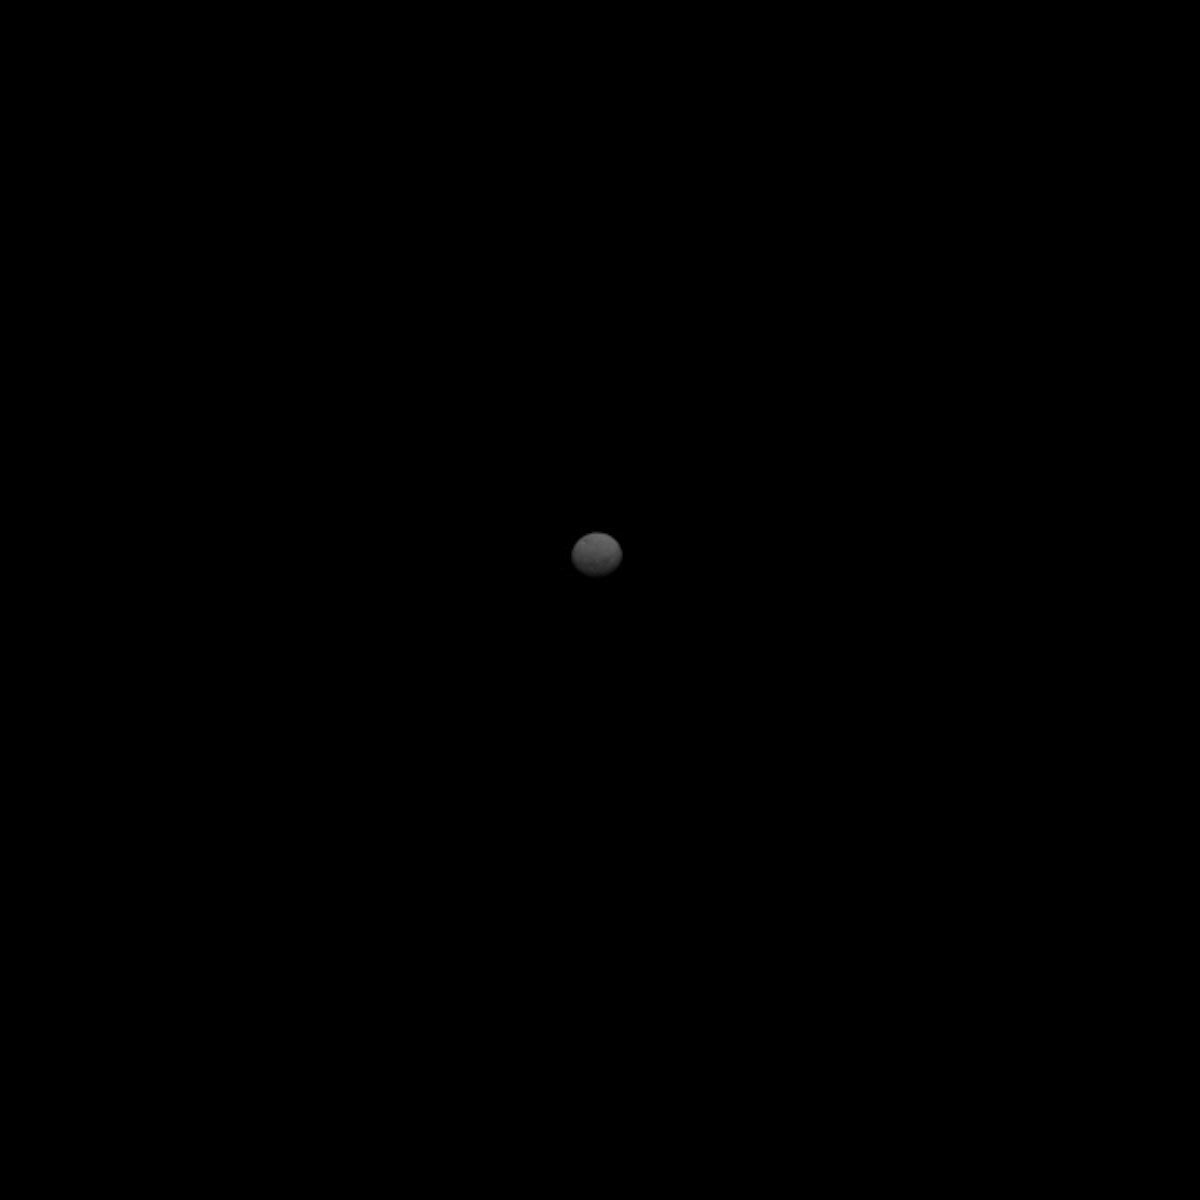 NASA Just Released The Best Images Of A Dwarf Planet We've Ever Seen